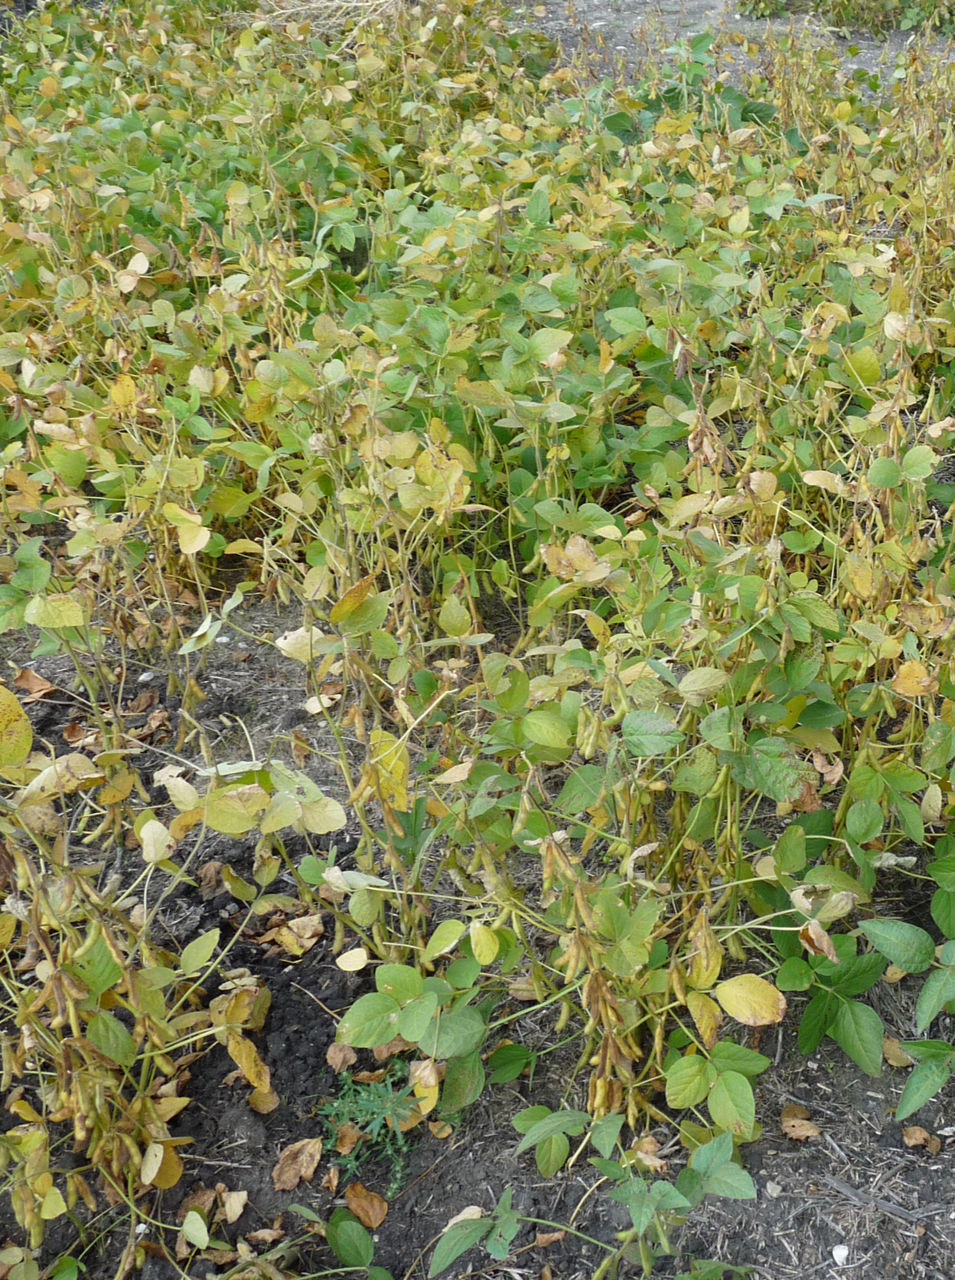  Soybean field  at R7 growth stage. 